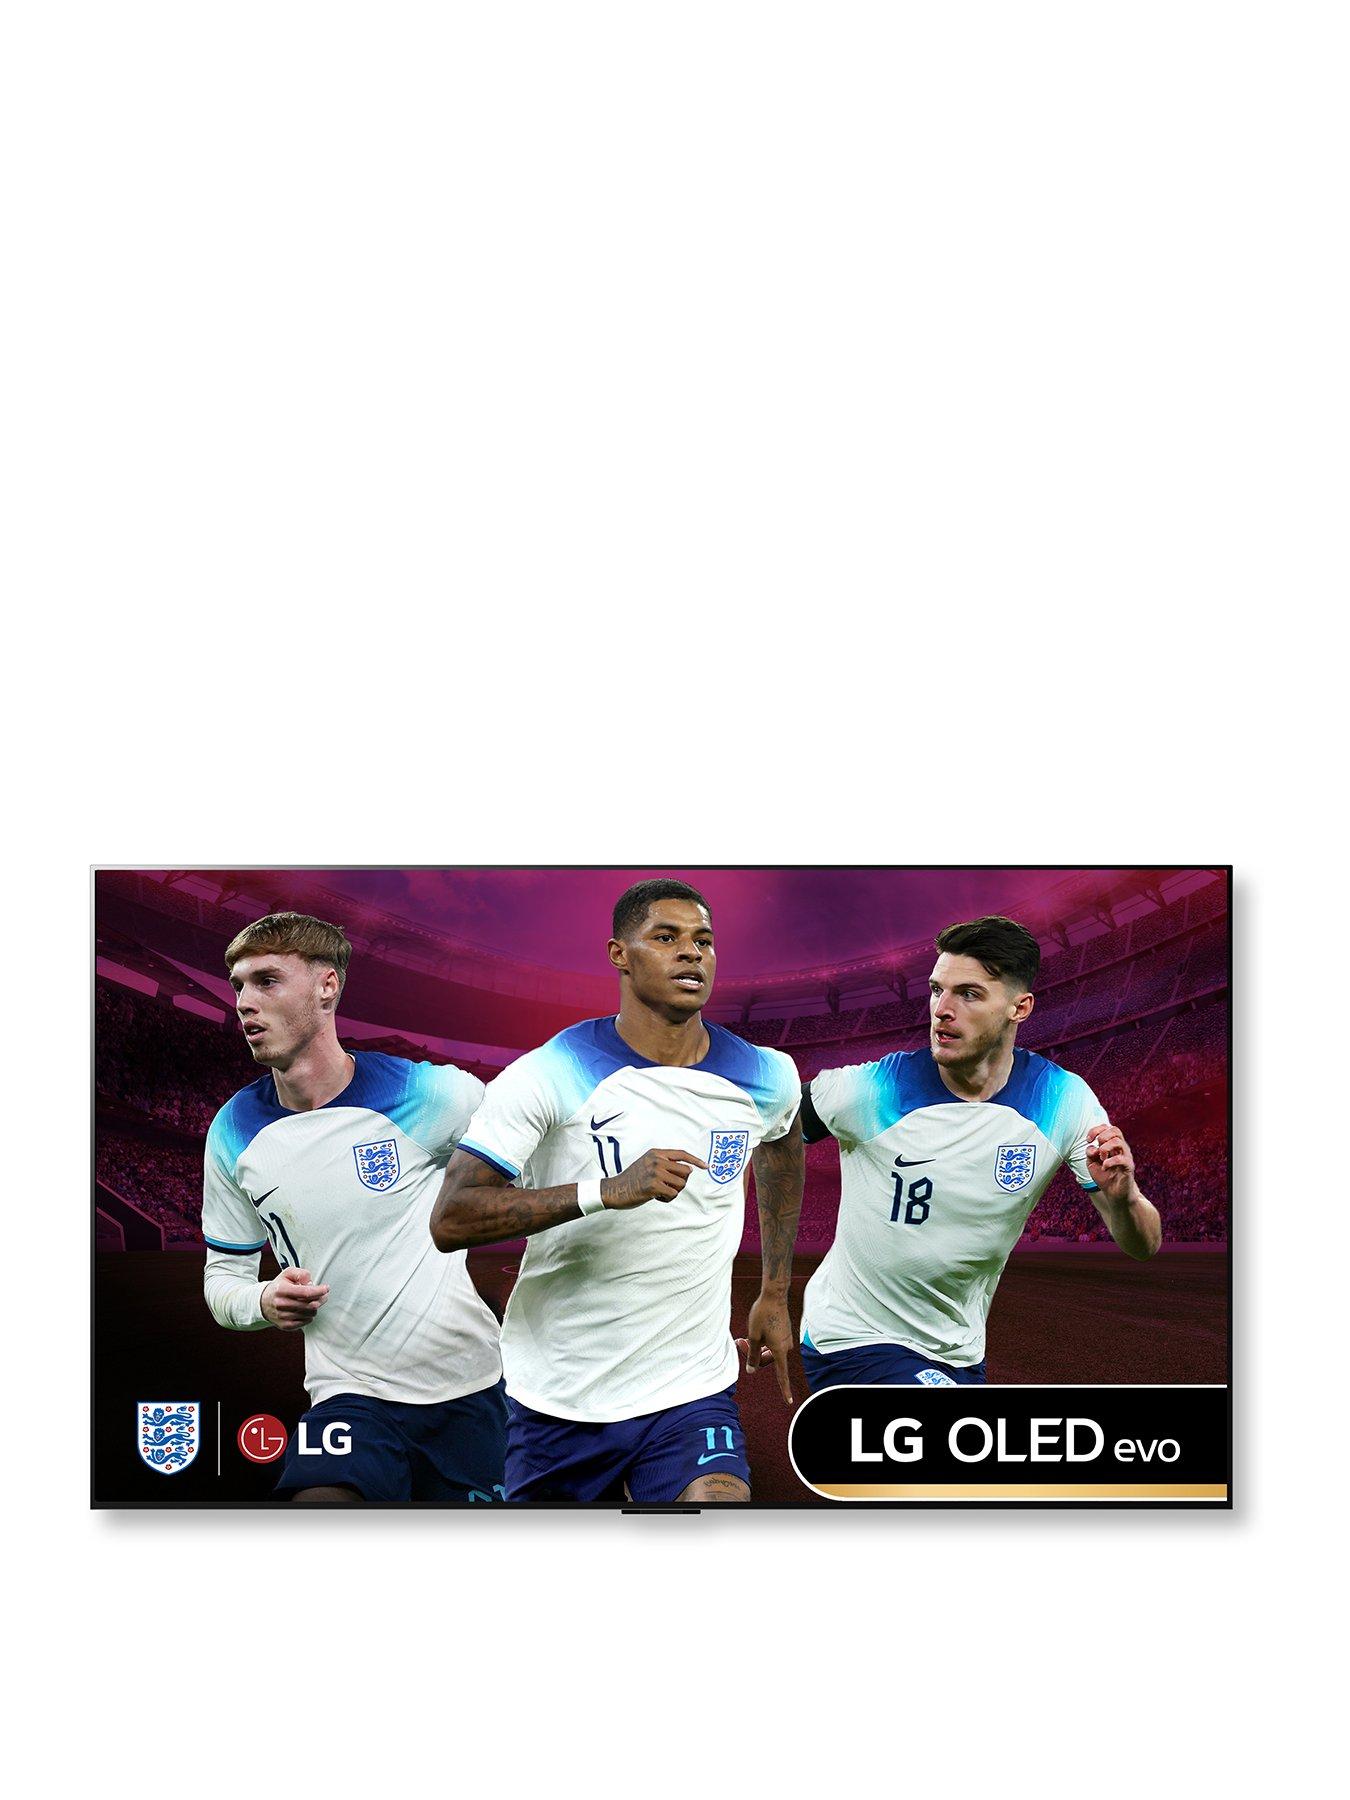 Our favourite 4K TV for gaming, the LG C1 OLED, is £759 for a 55